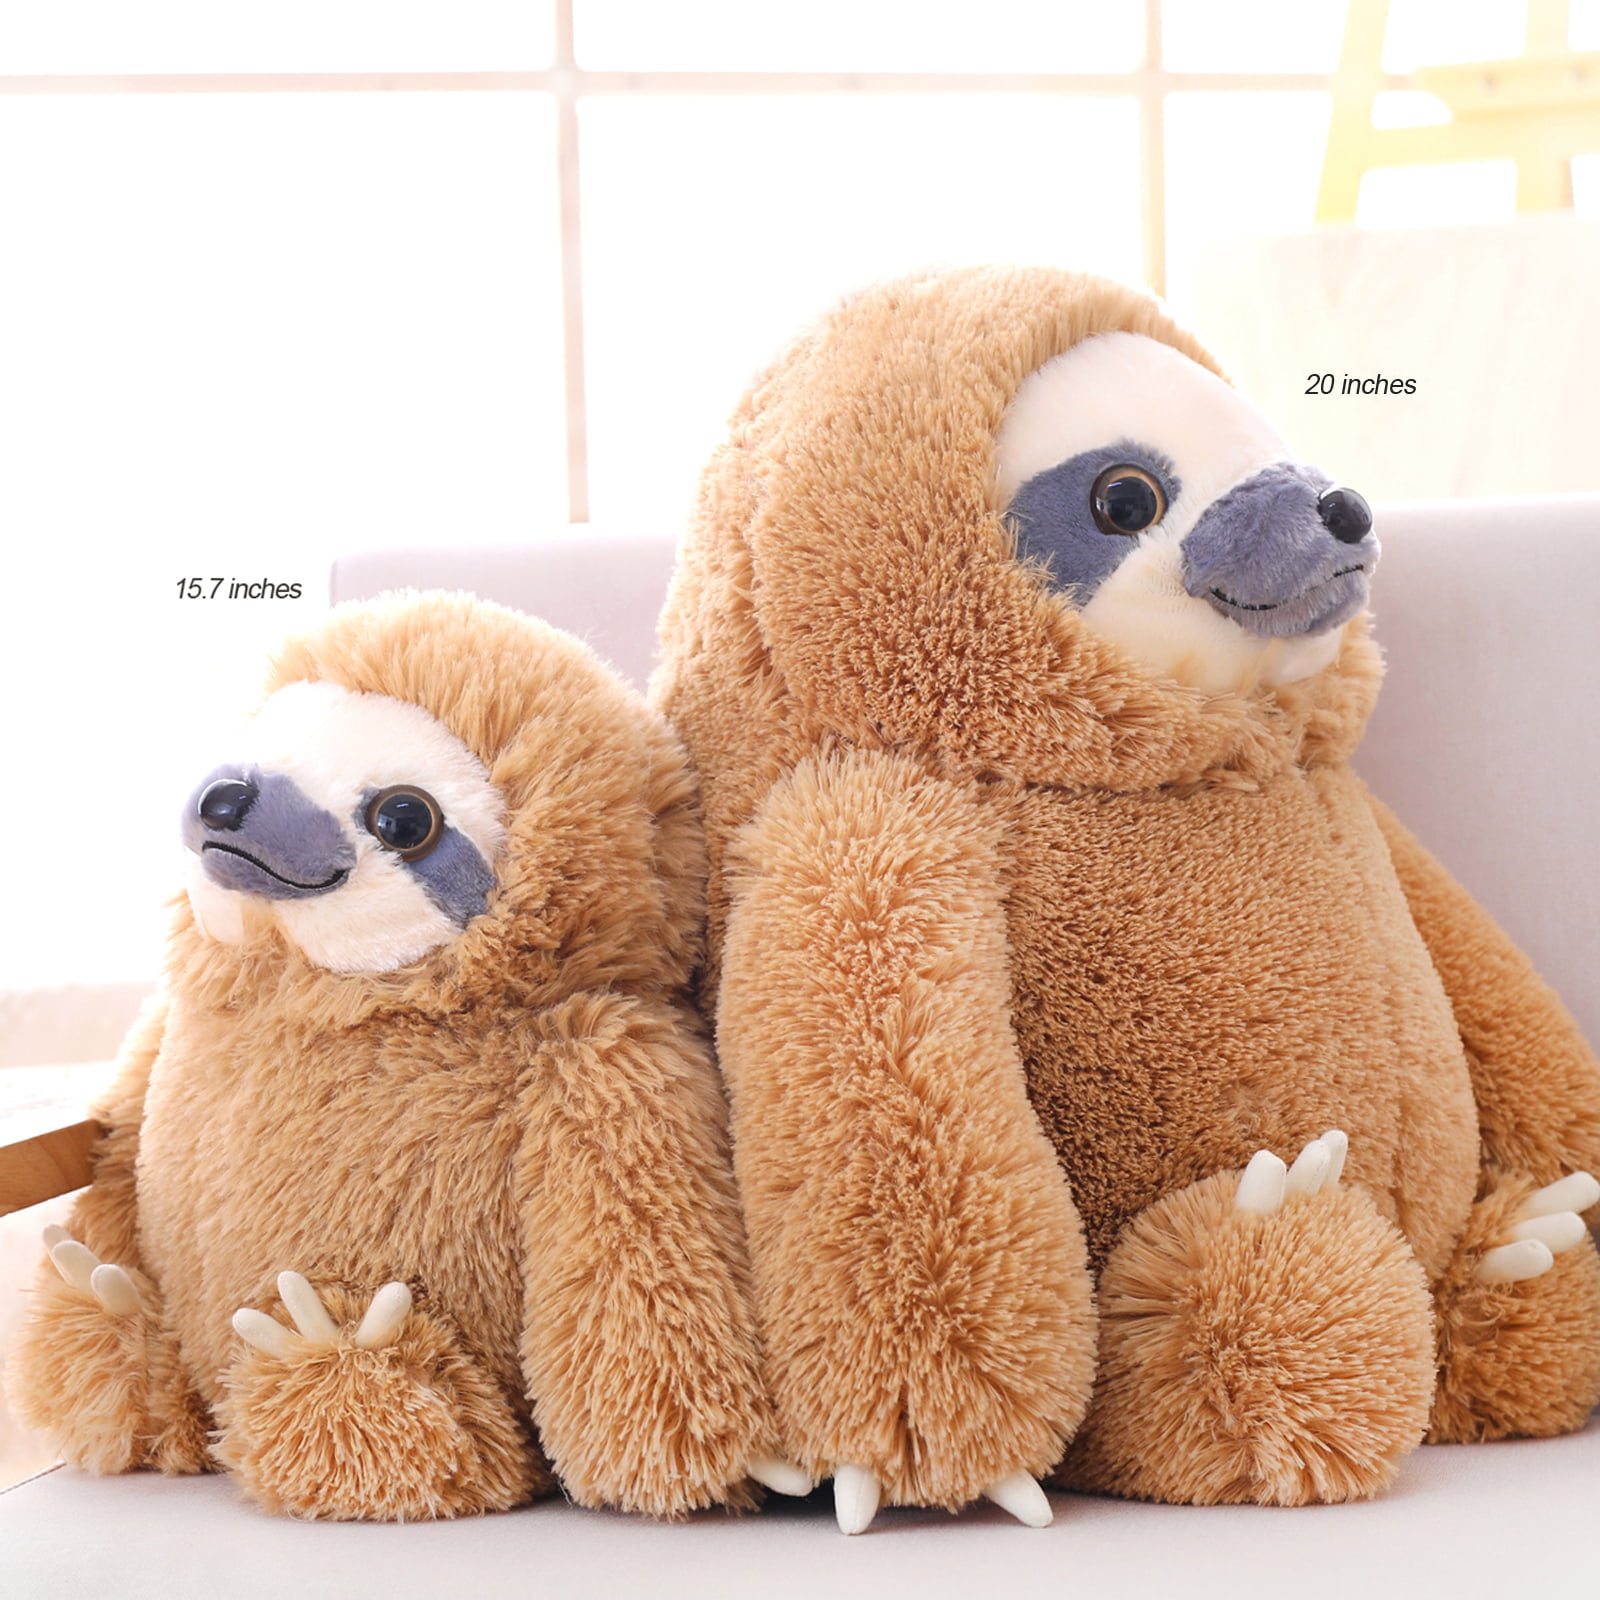 Winsterch Giant Fluffy Sloth Stuffed Animal Toy for Kids Large Plush Sloth Toy B 